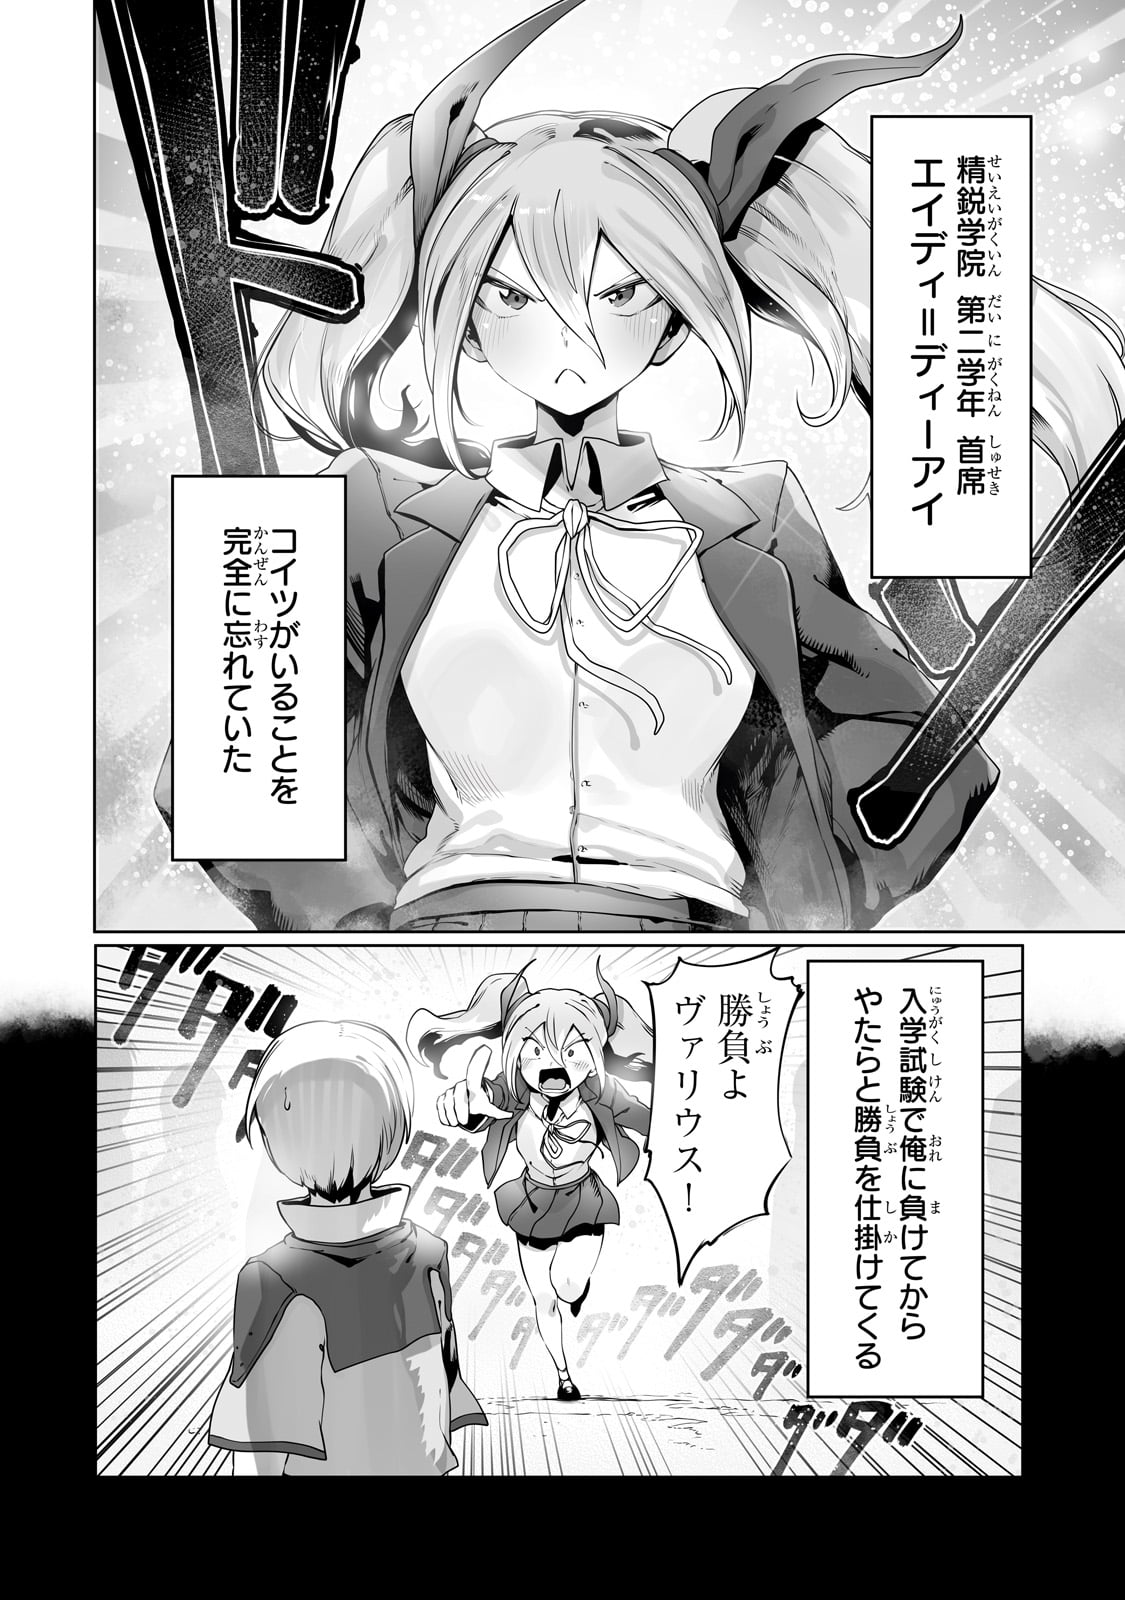 The Useless Tamer Will Turn Into the Top Unconsciously by My Previous Life Knowledge - Chapter 34 - Page 2